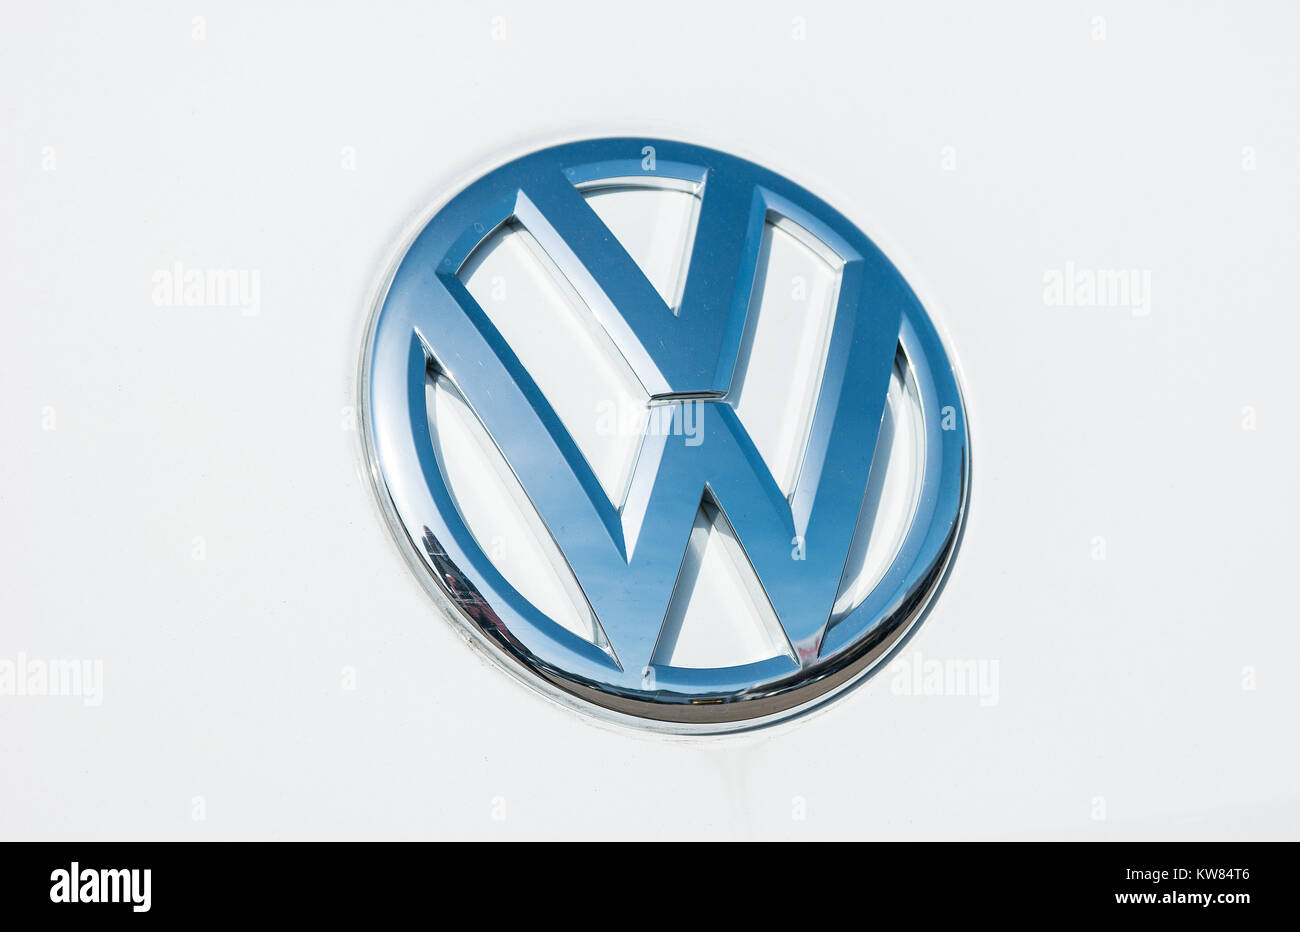 Volkswagen VW logo on a white car. Volkswagen is a famous European car manufacturer company based on Germany. Stock Photo